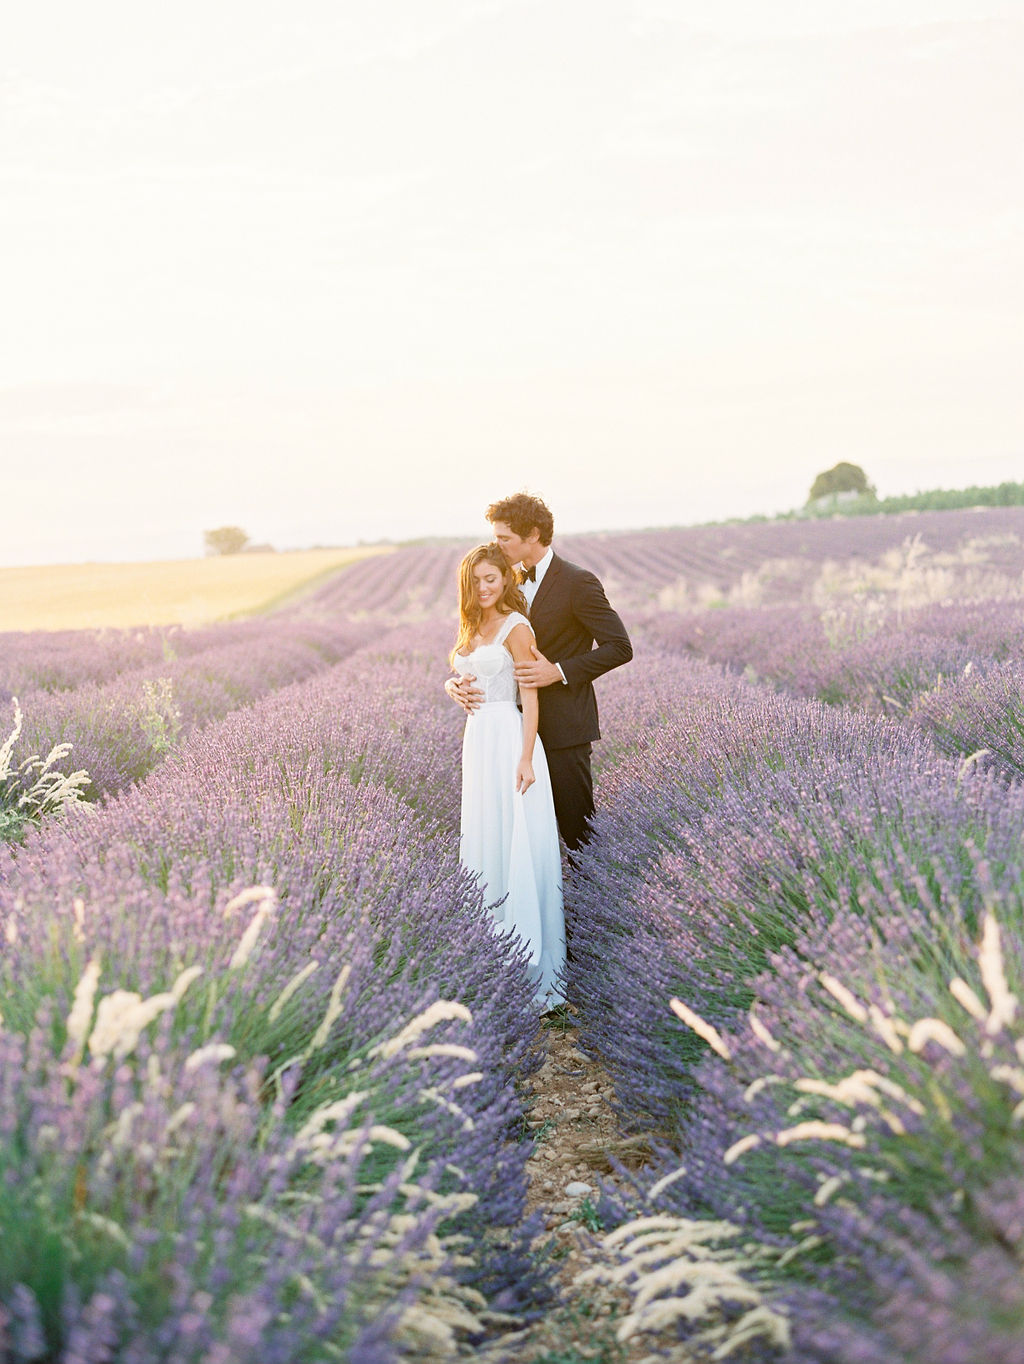 Love among the lavender fields - 100 Layer Cake